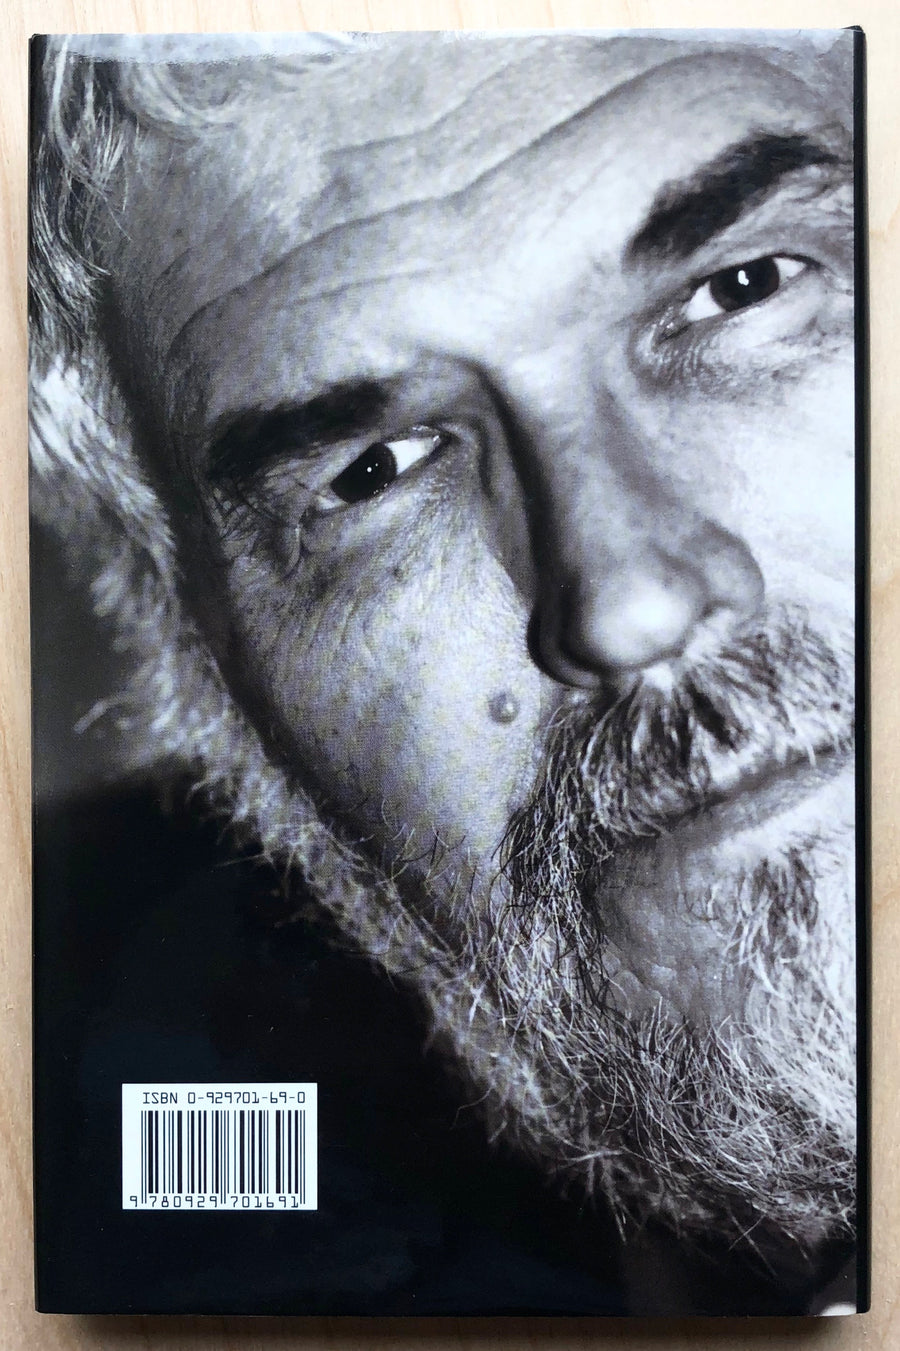 TELLING TIME: ESSAYS OF A VISIONARY FILMMAKER by Stan Brakhage